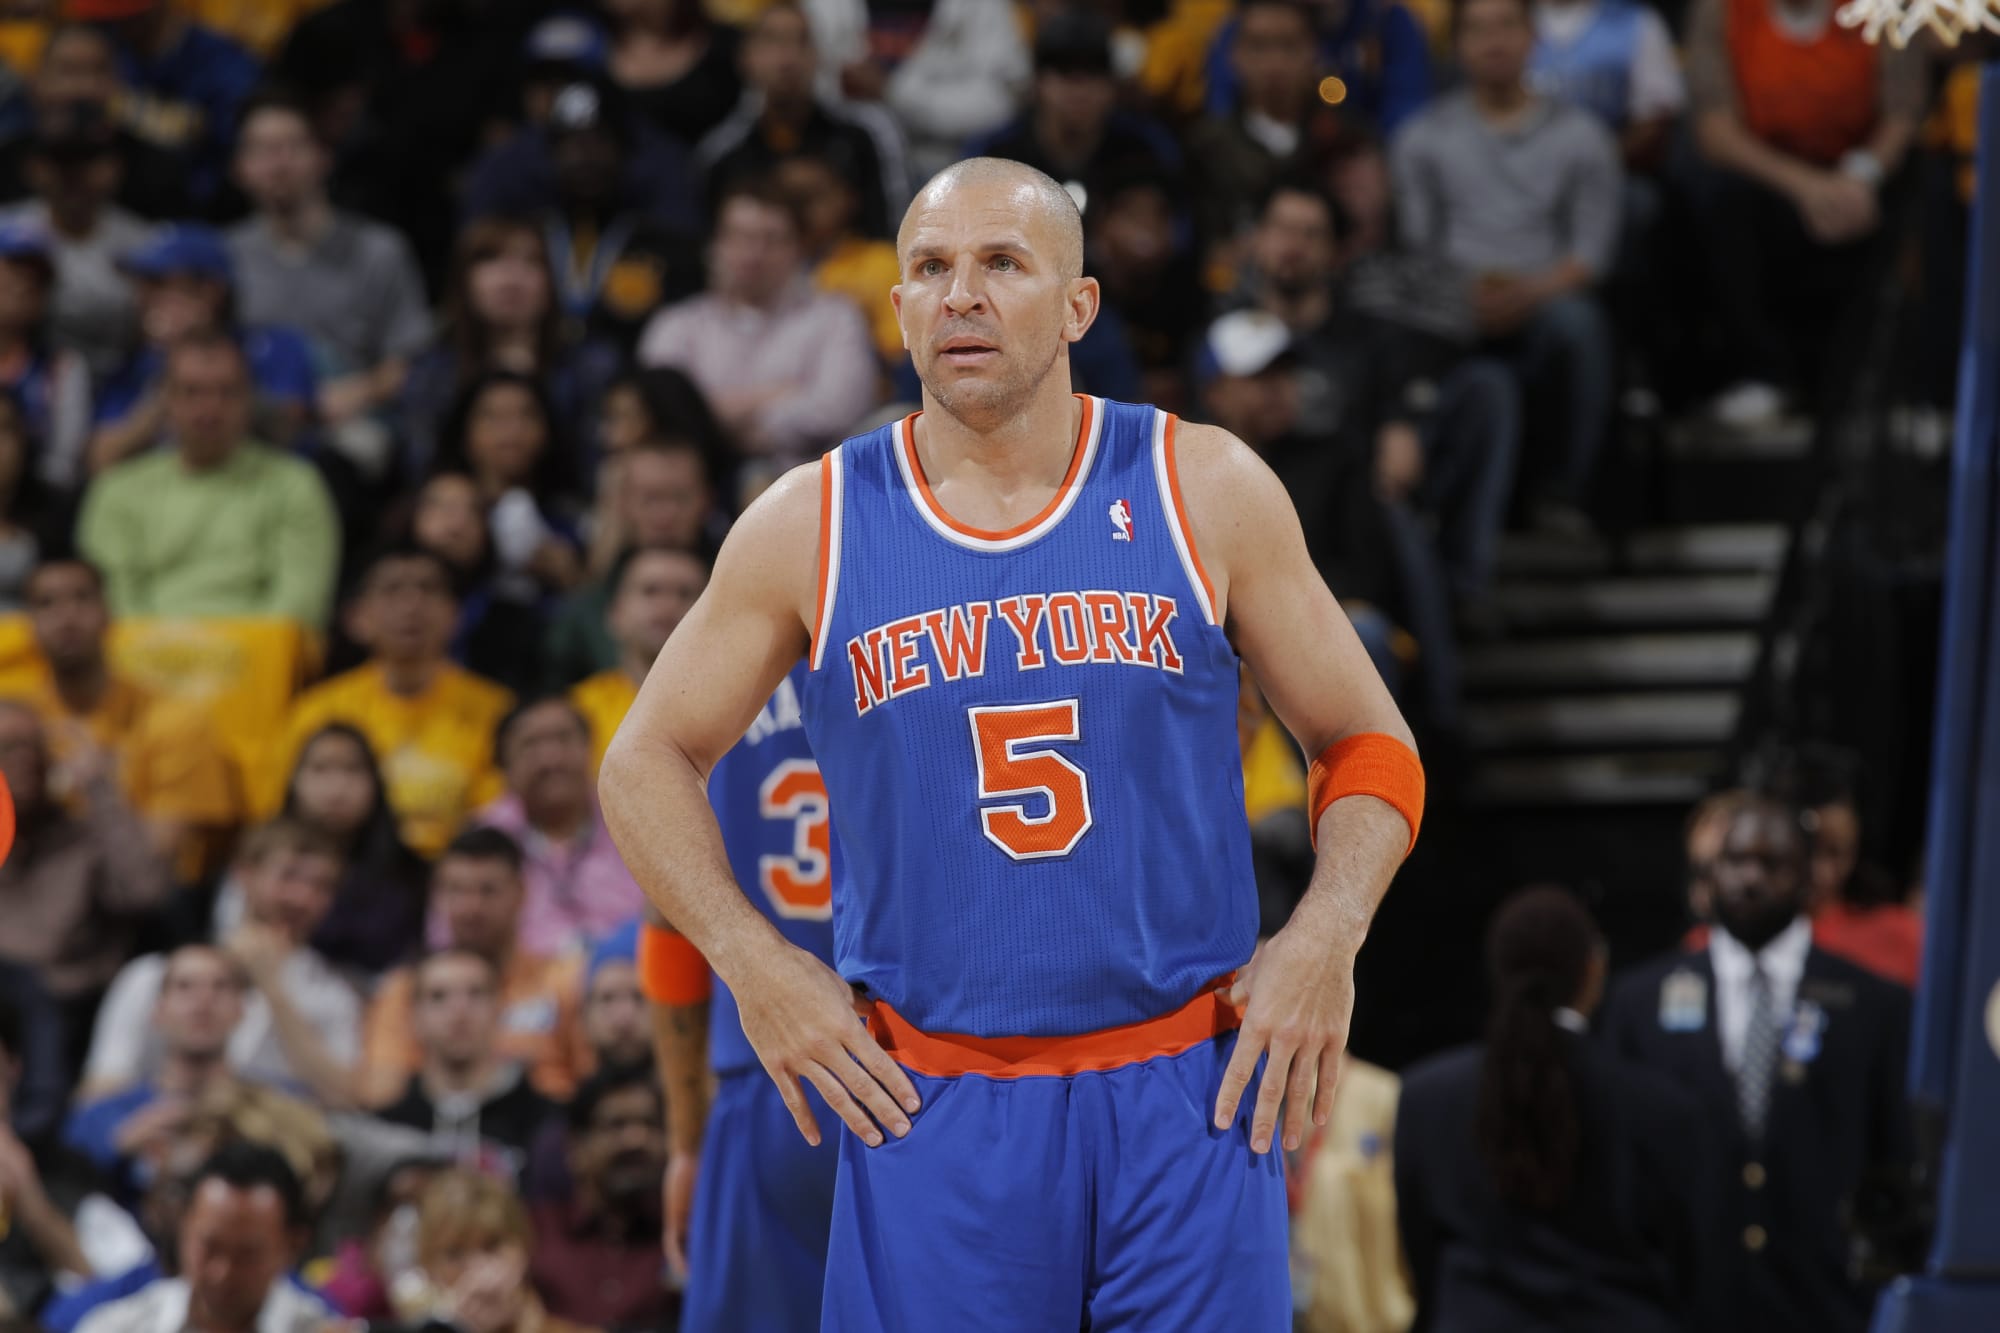 Jason Kidd was meant to play with the Knicks in his prime, not the